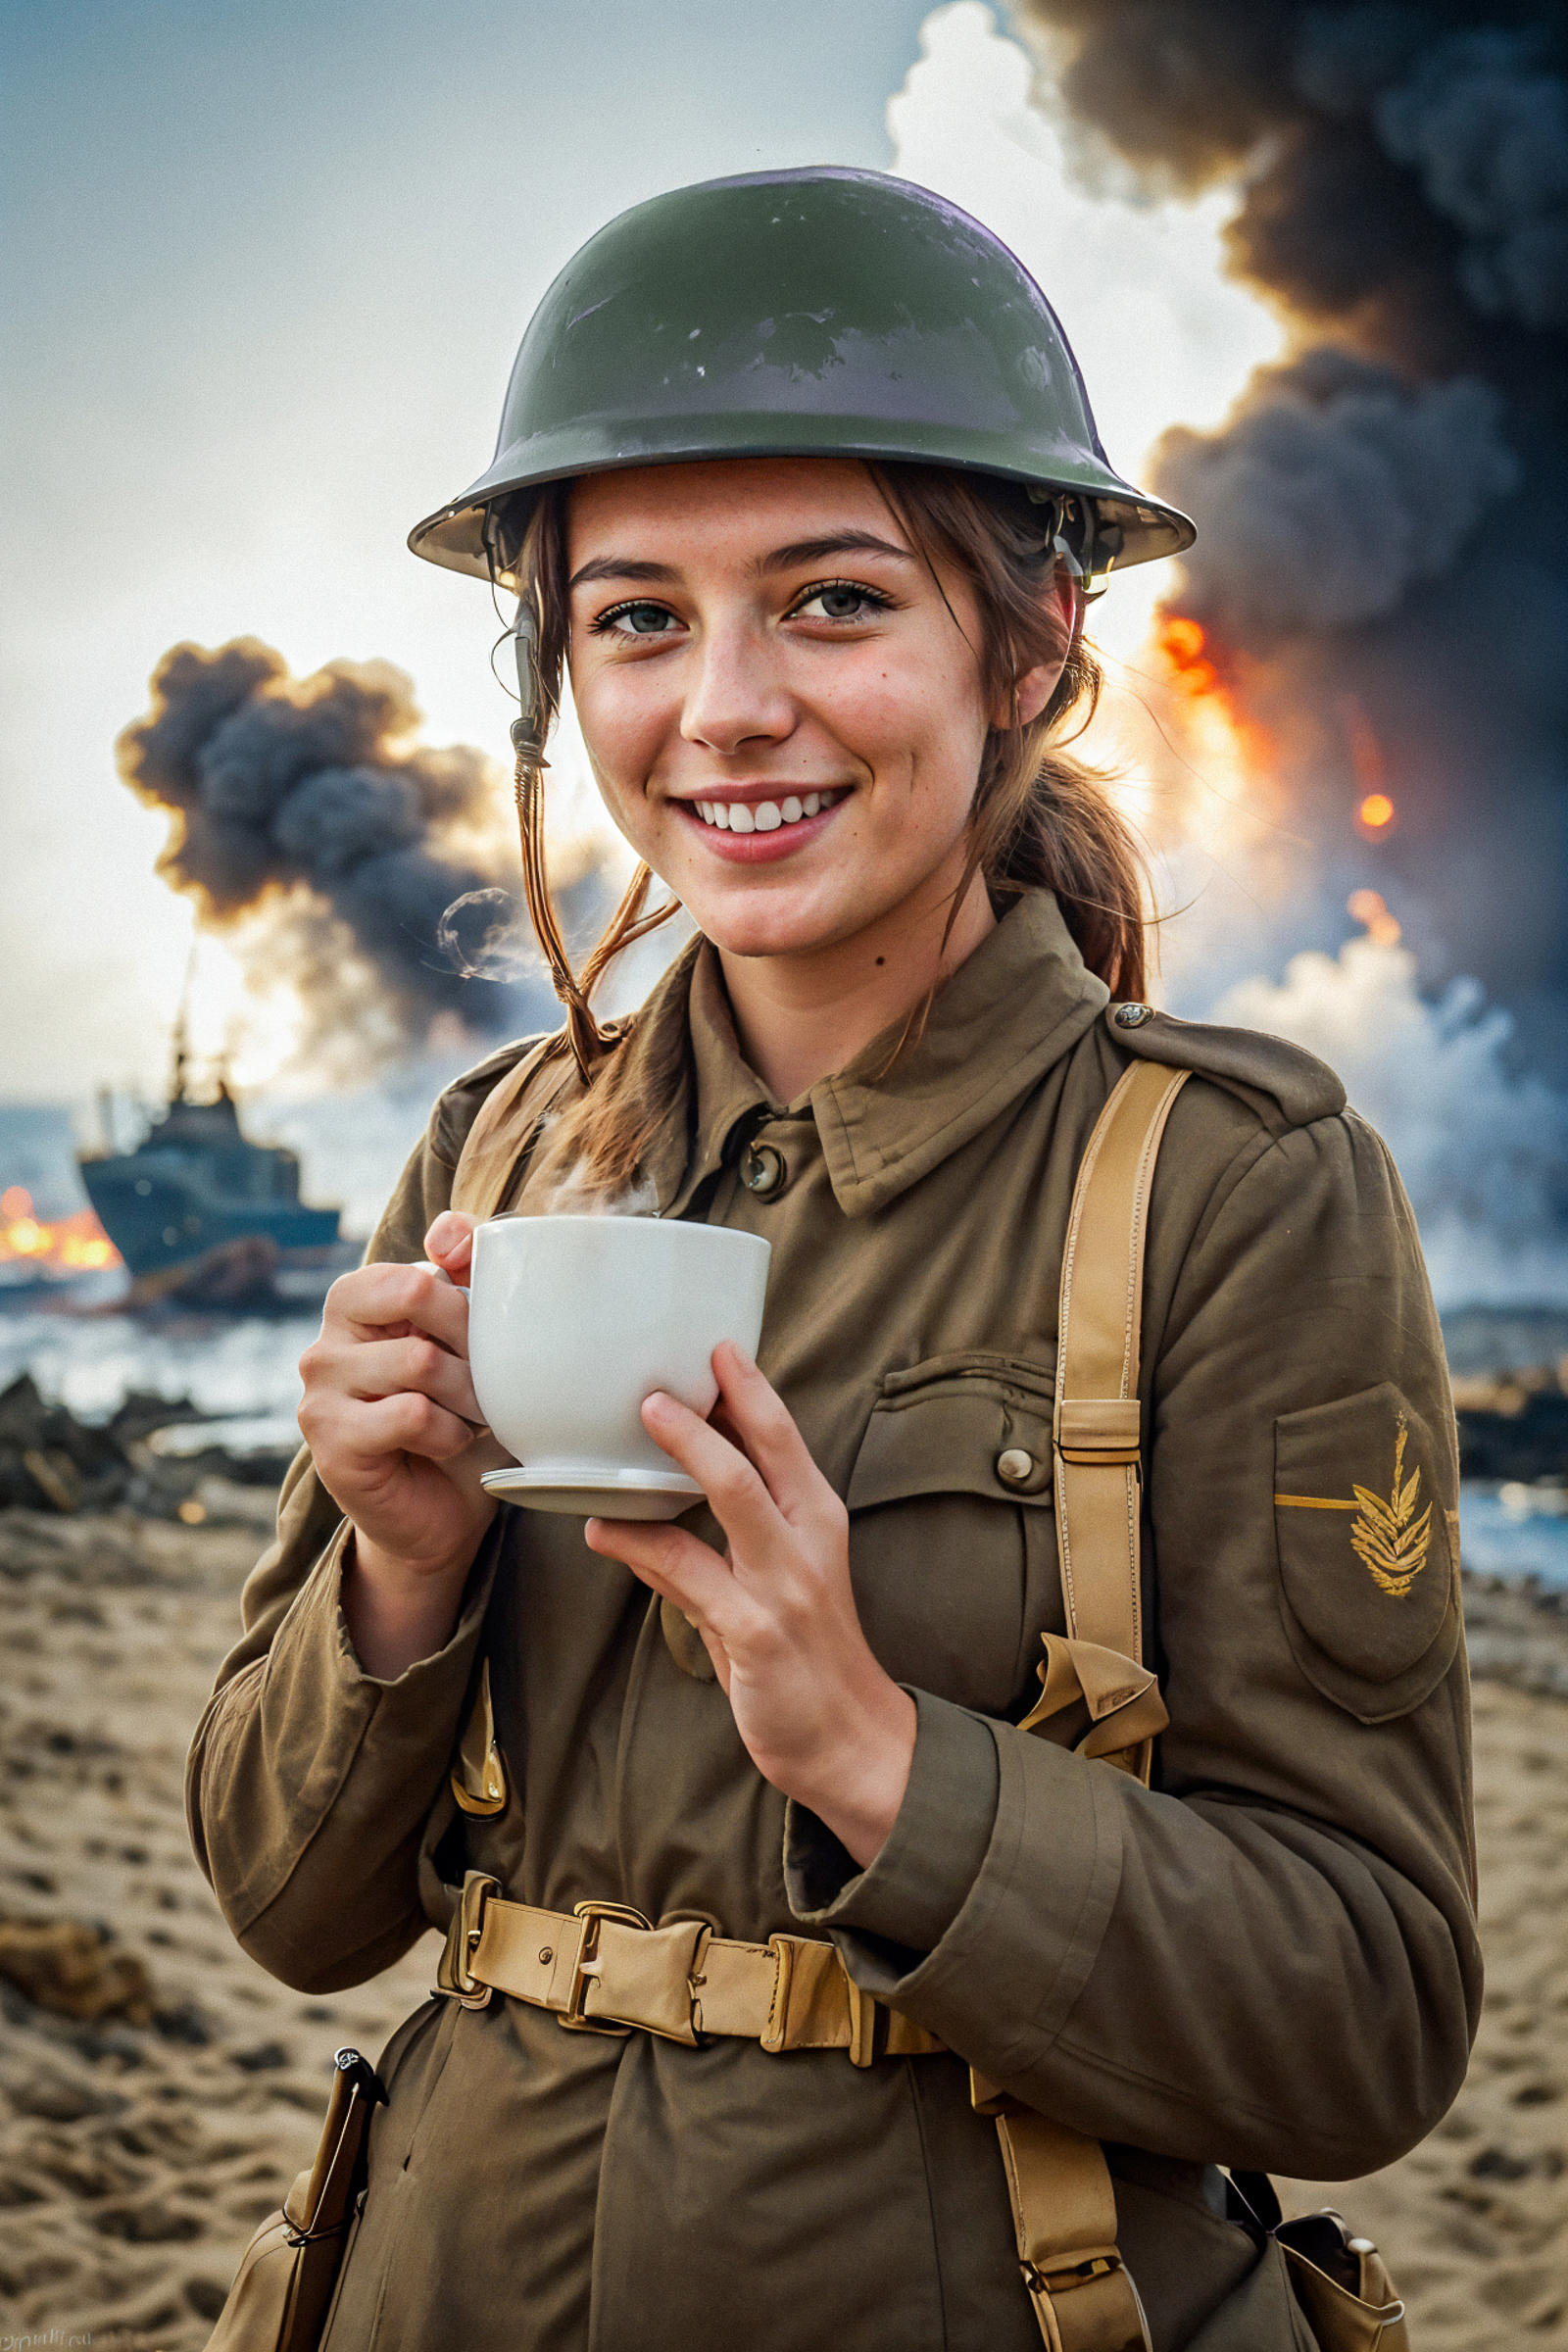 Woman in Military Uniform Holding a Coffee Cup